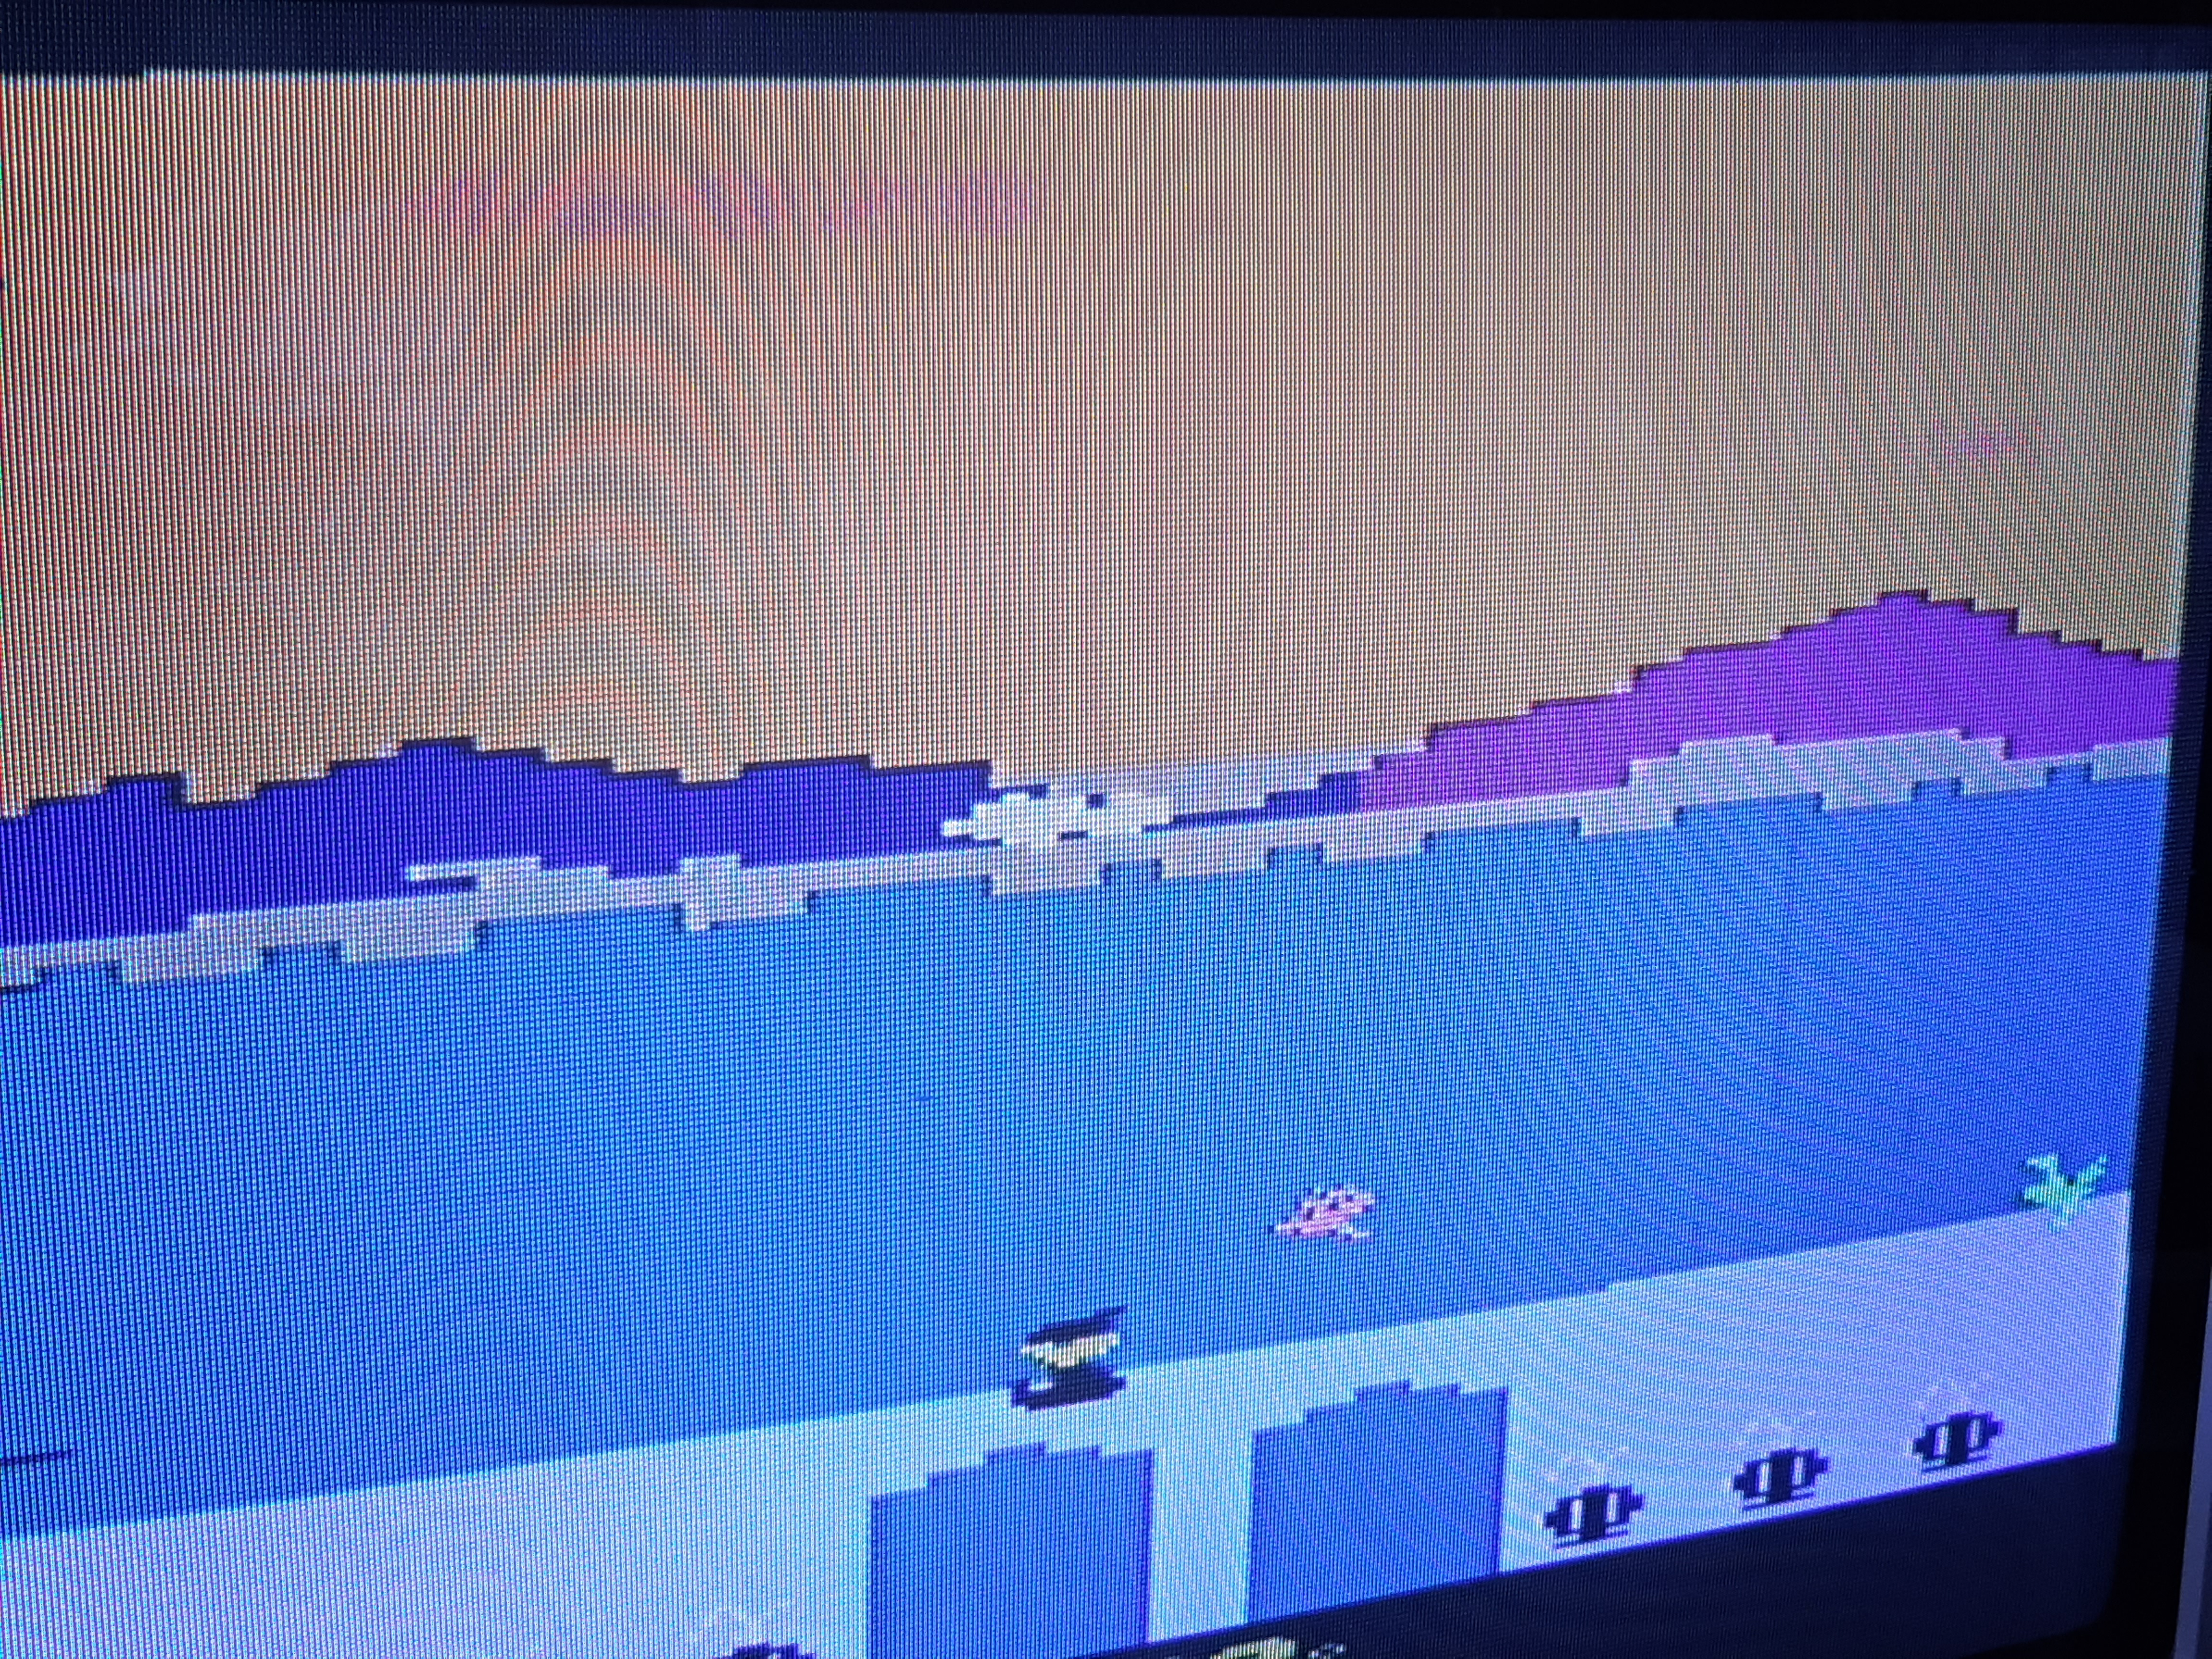 emmbo: Bobby Is Going Home (Atari 2600 Novice/B) 46,920 points on 2020-02-22 06:24:40